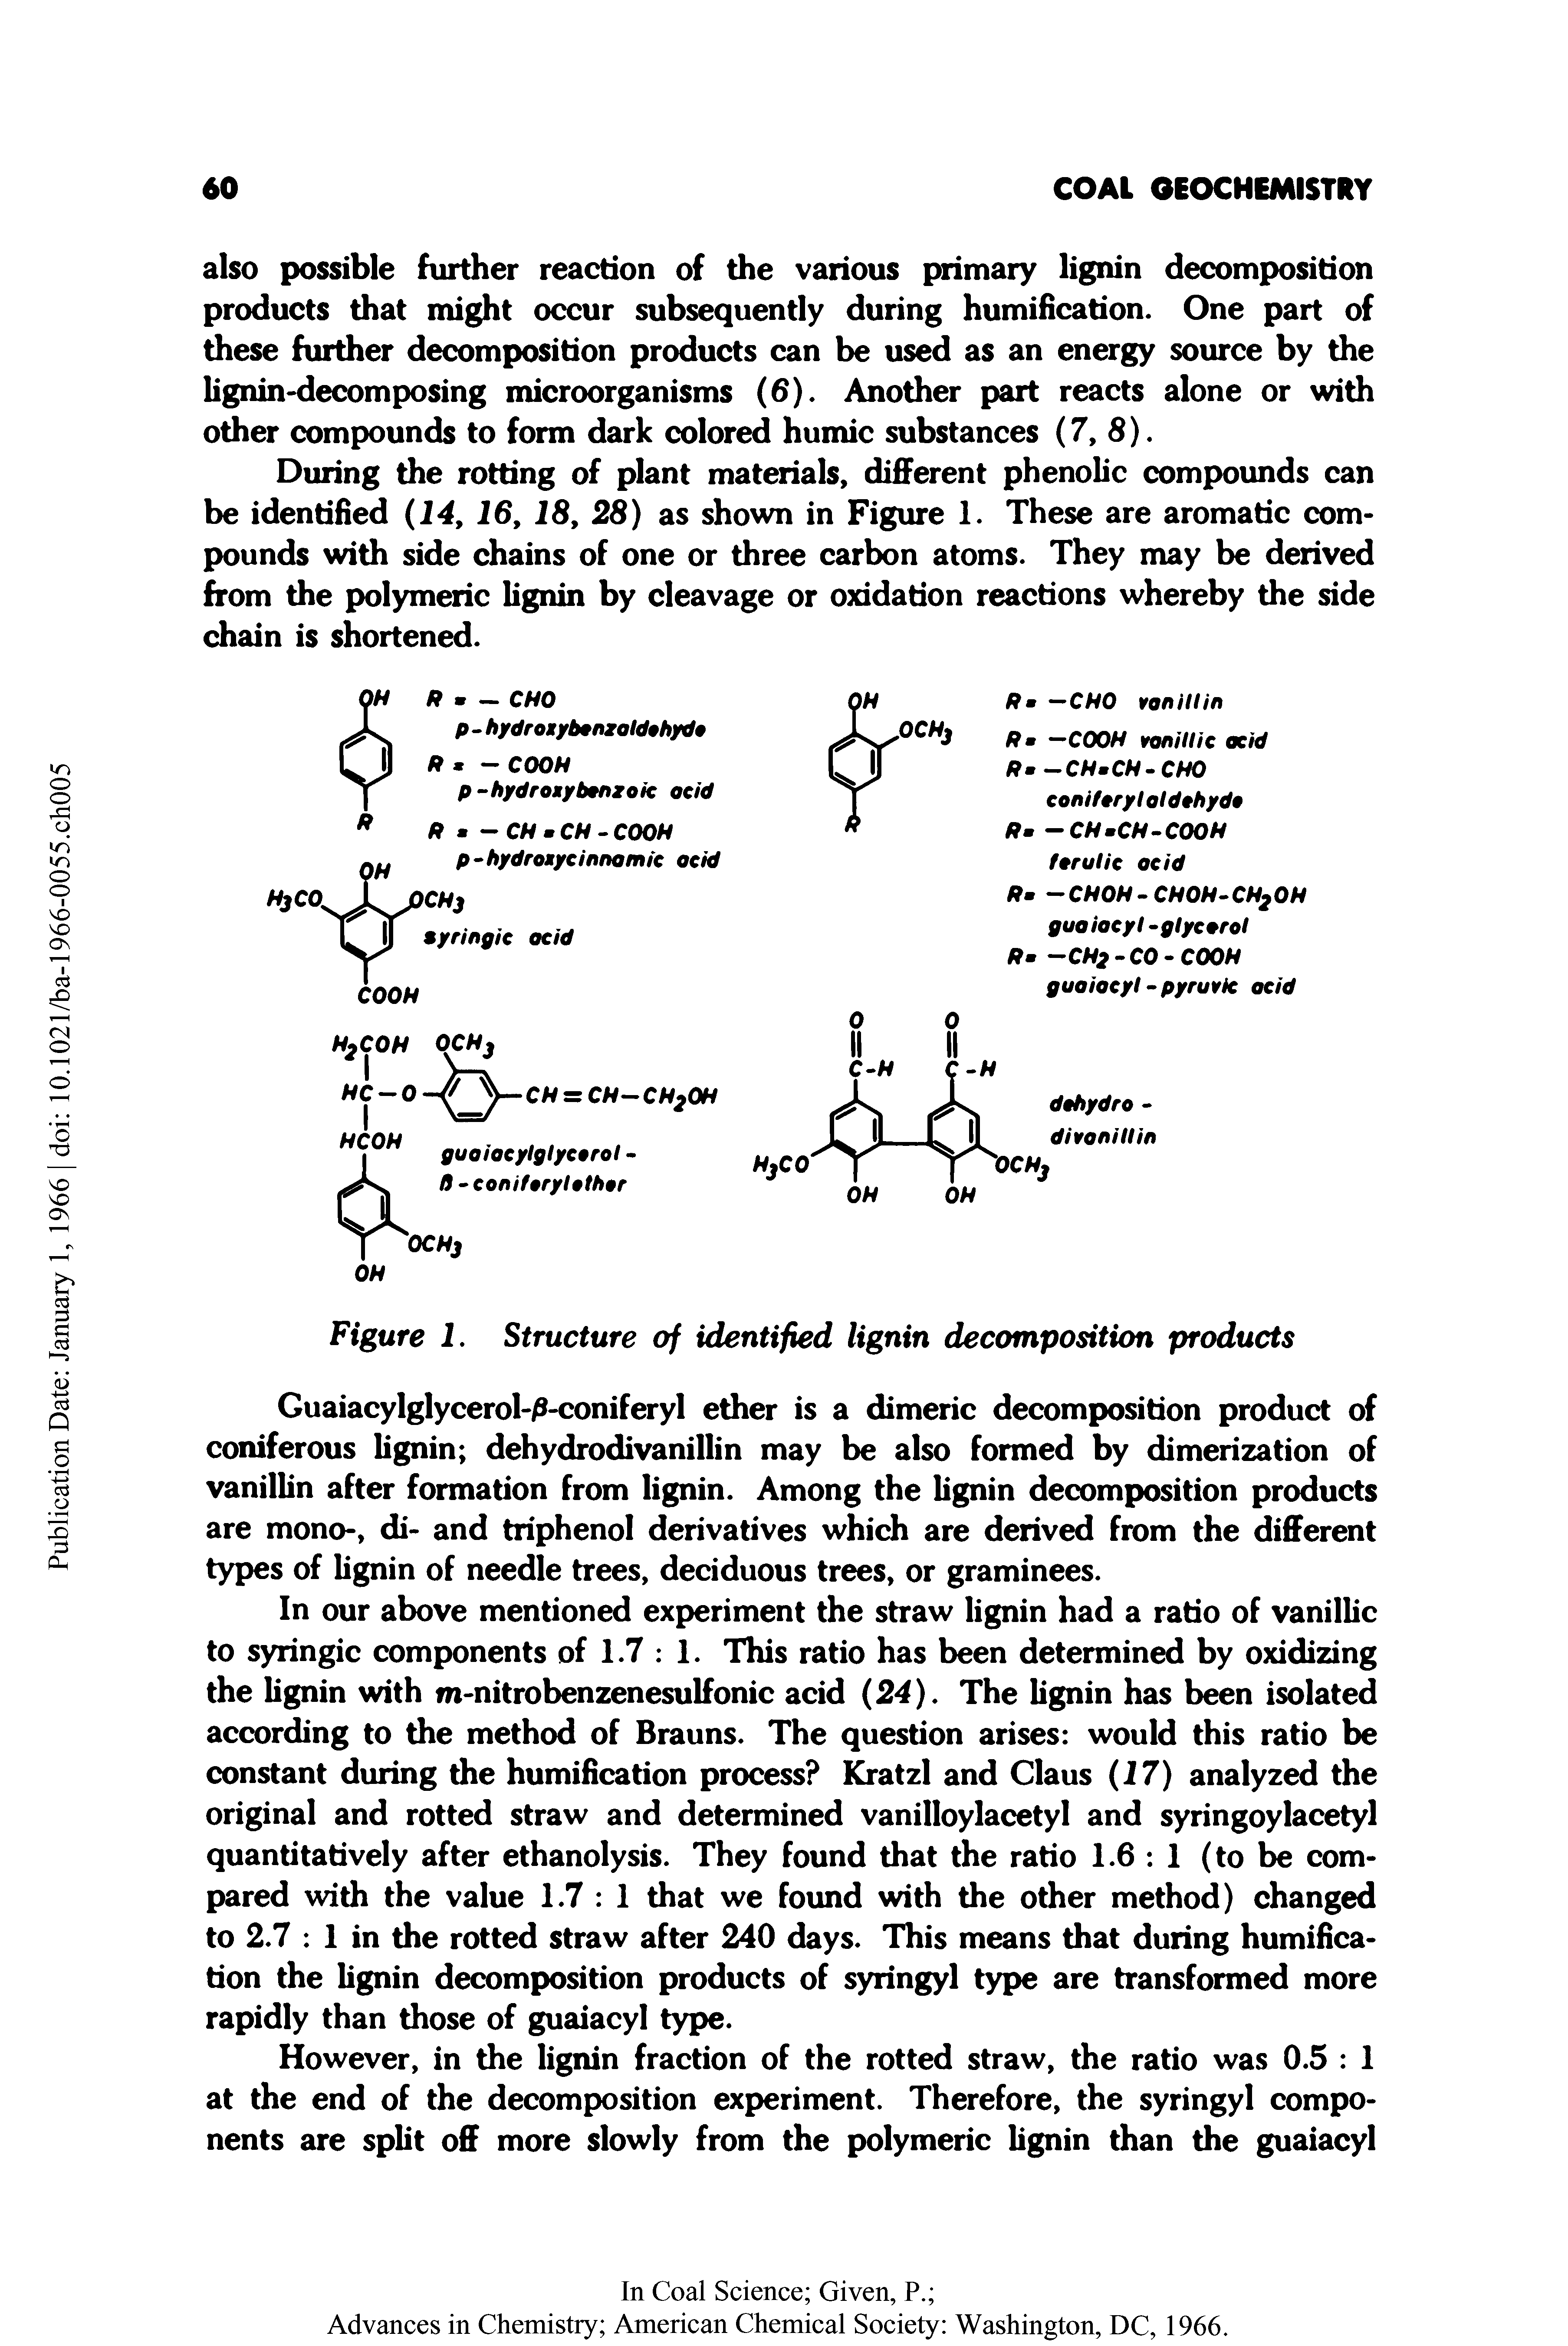 Figure 1. Structure of identified lignin decomposition products...